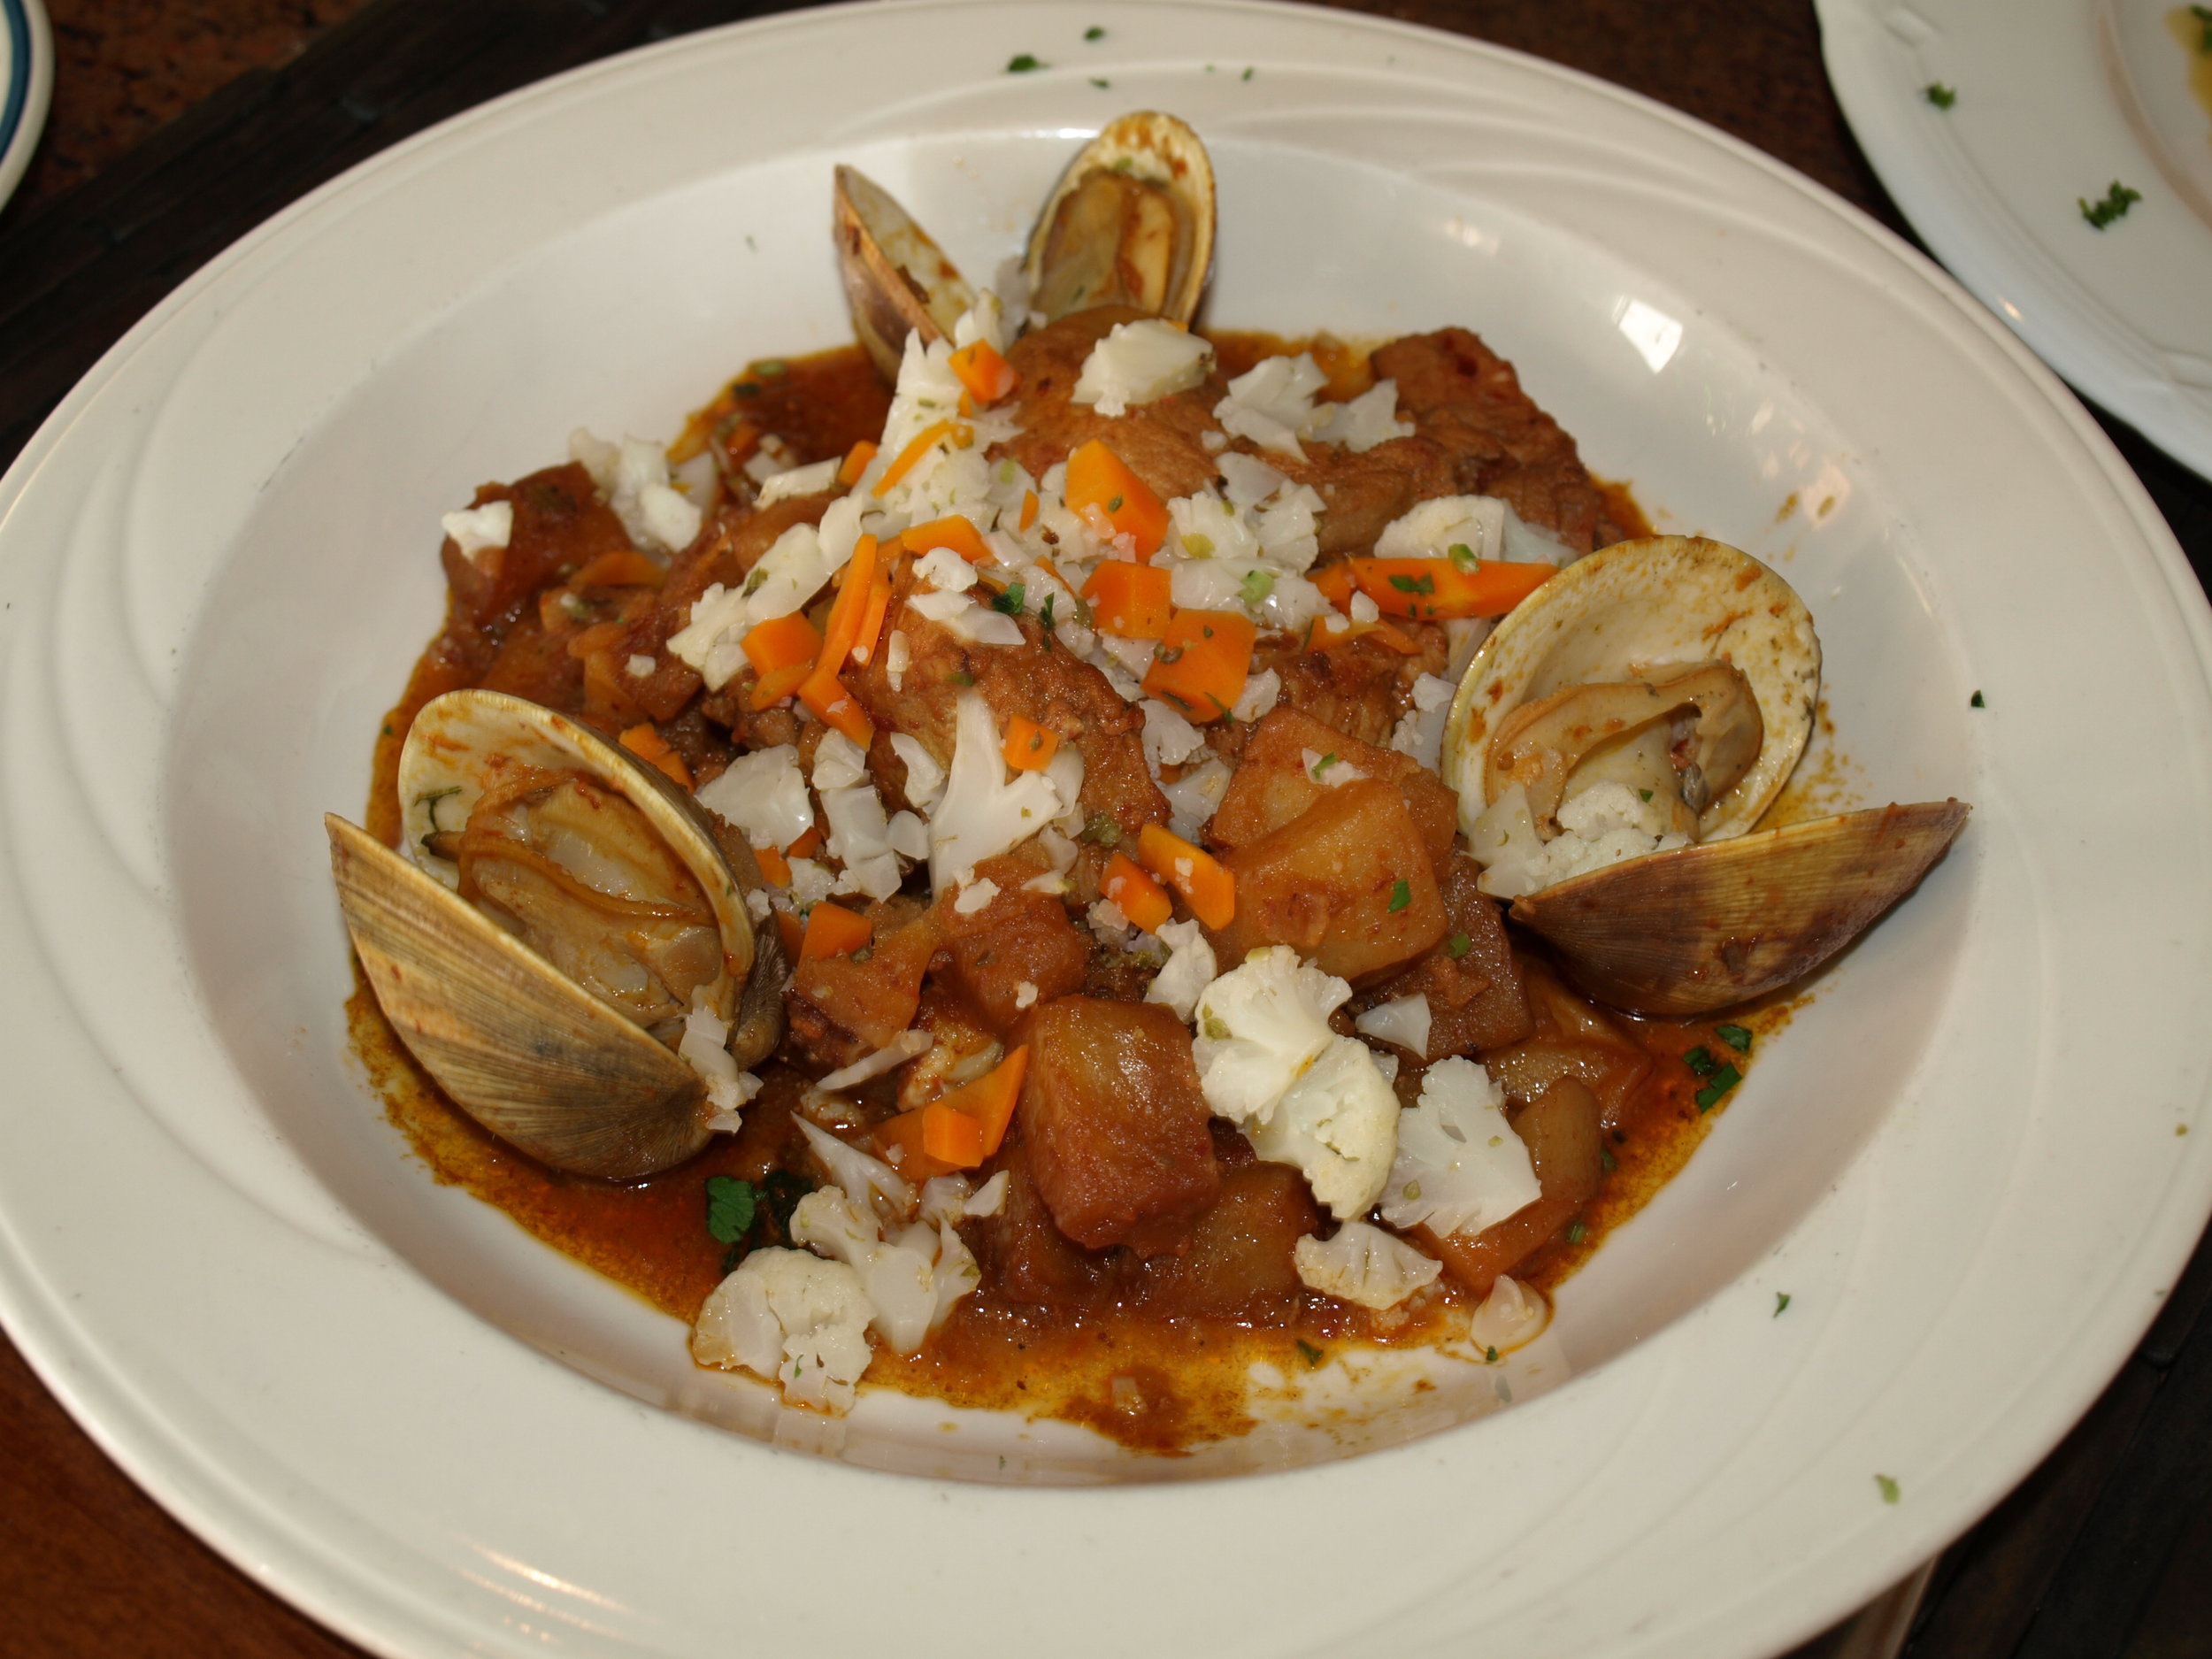   The Carne de Porco a Alentejana ($29) includes pork and whole clams stewed with potatoes and a roasted red pepper puree.   Long Islander News Photo/Connor Beach  